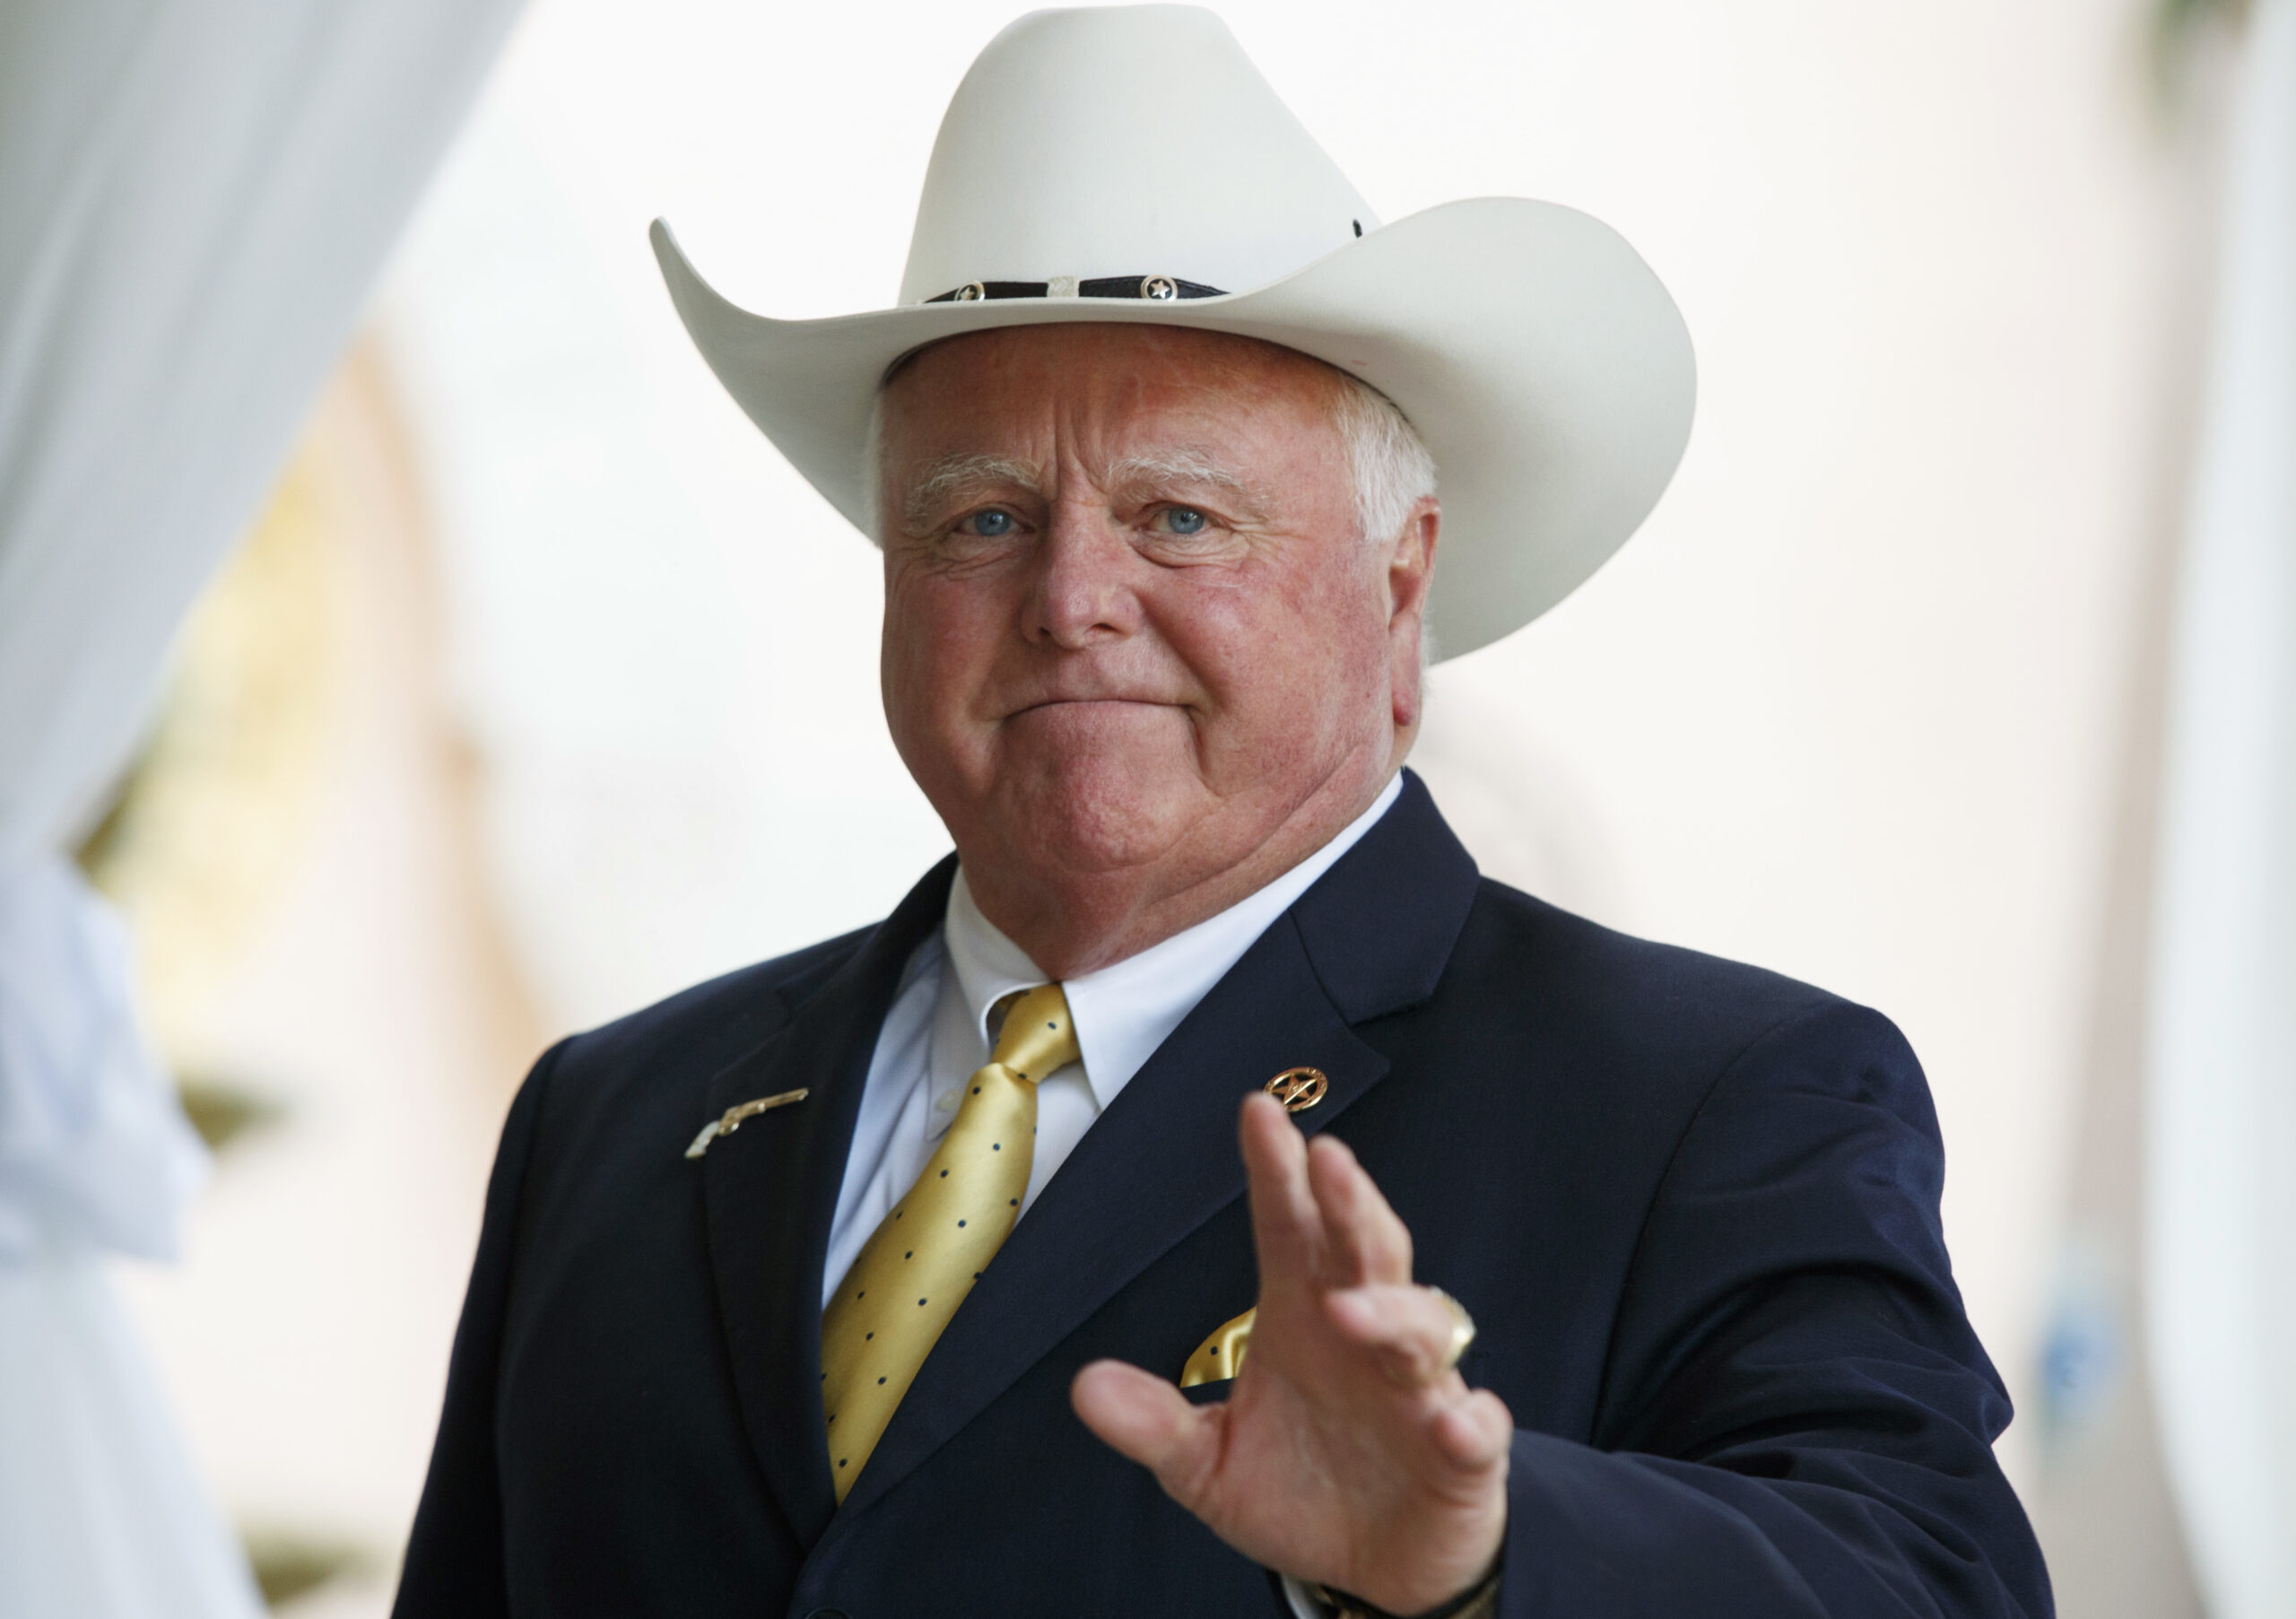 Agriculture Commissioner Sid Miller, a broad-shouldered white man in a white "10 gallon" cowboy hat atop his tailored suit and metallic gold polka dot tie.